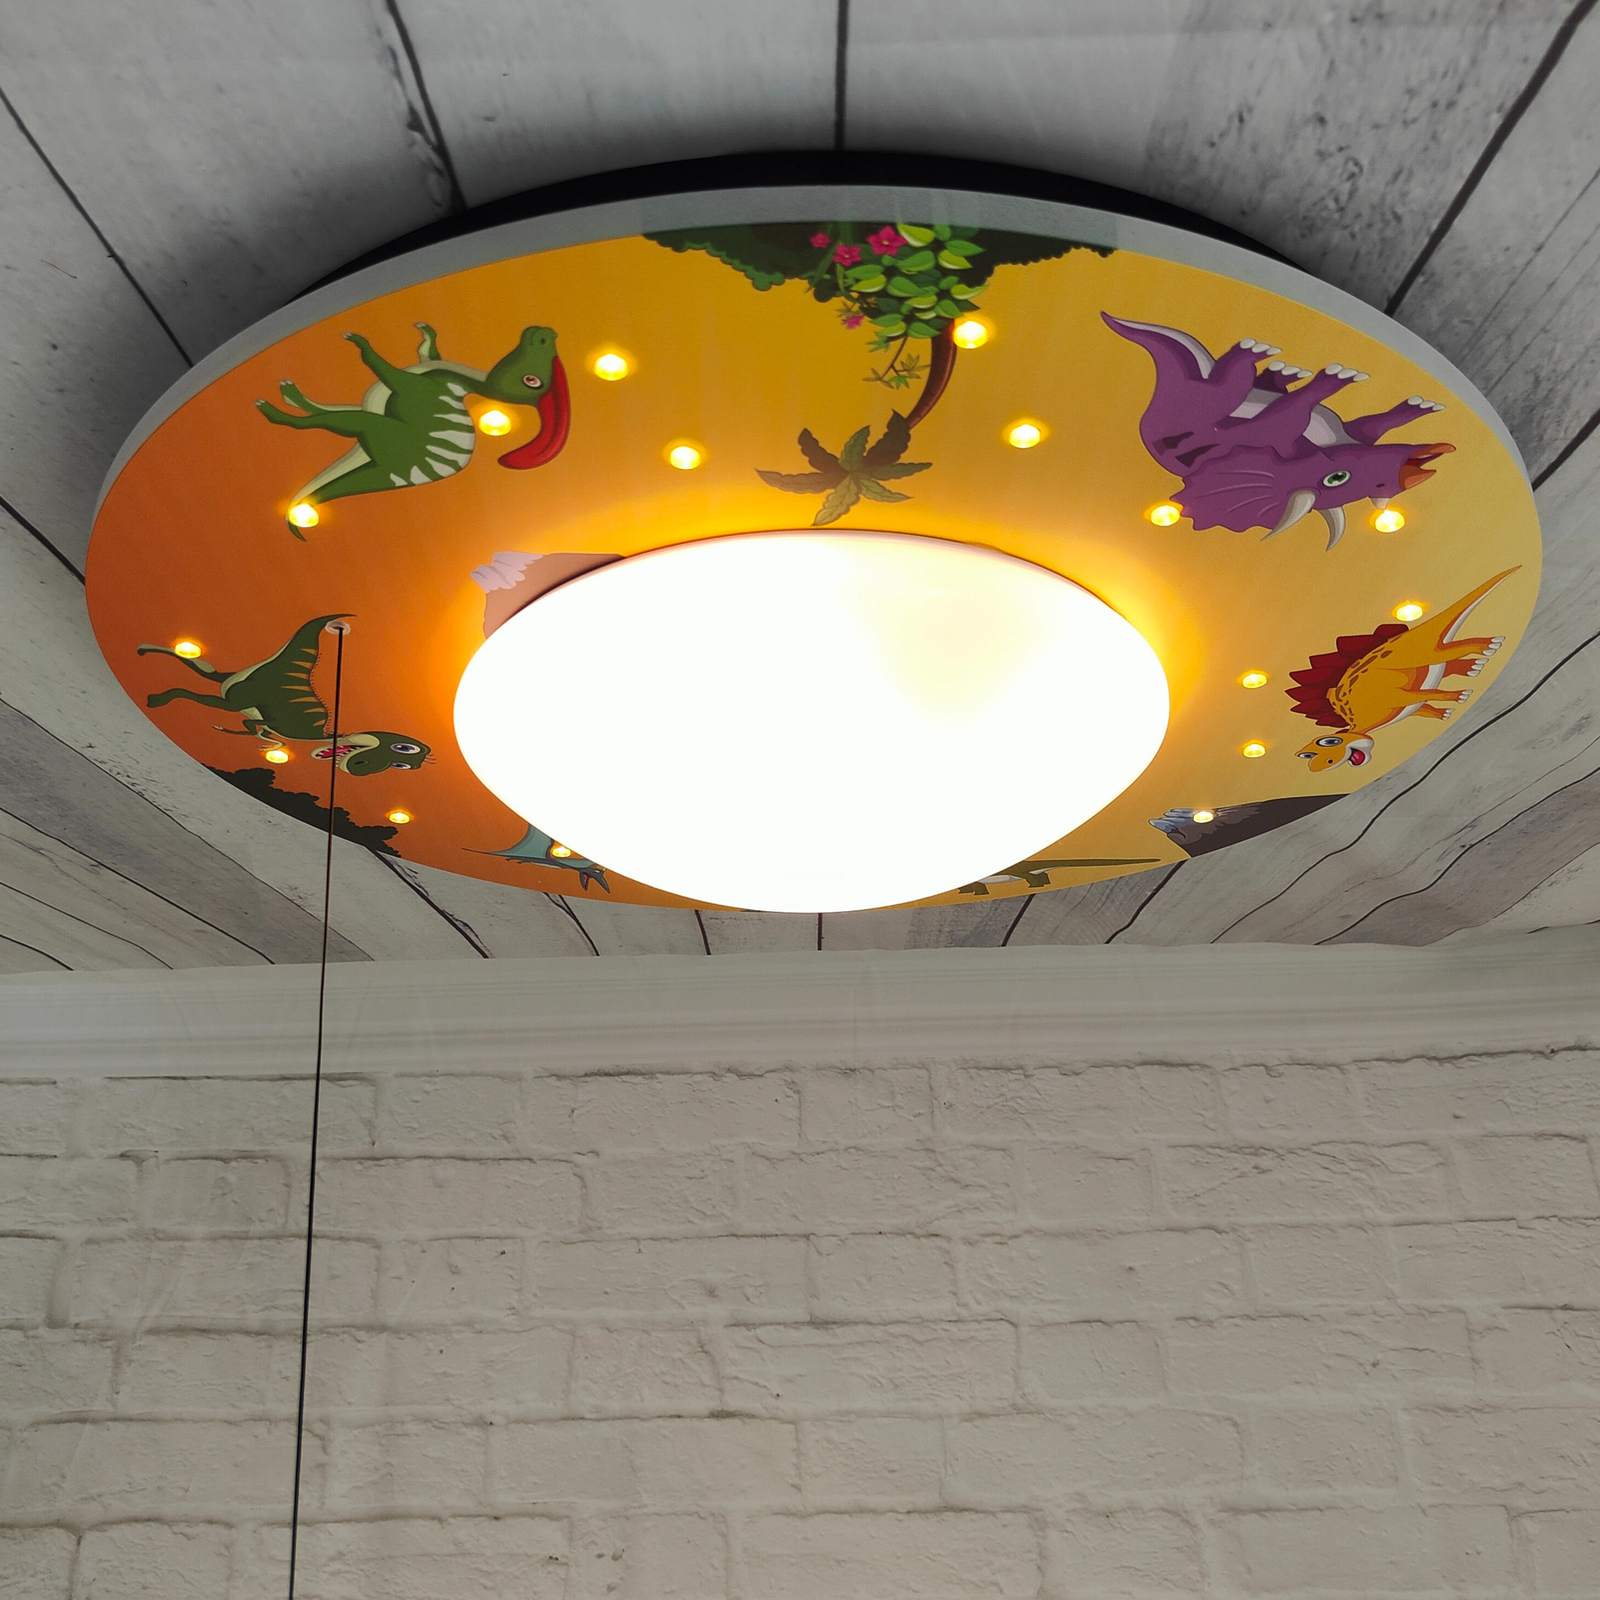 Dinos ceiling light with an LED starry sky